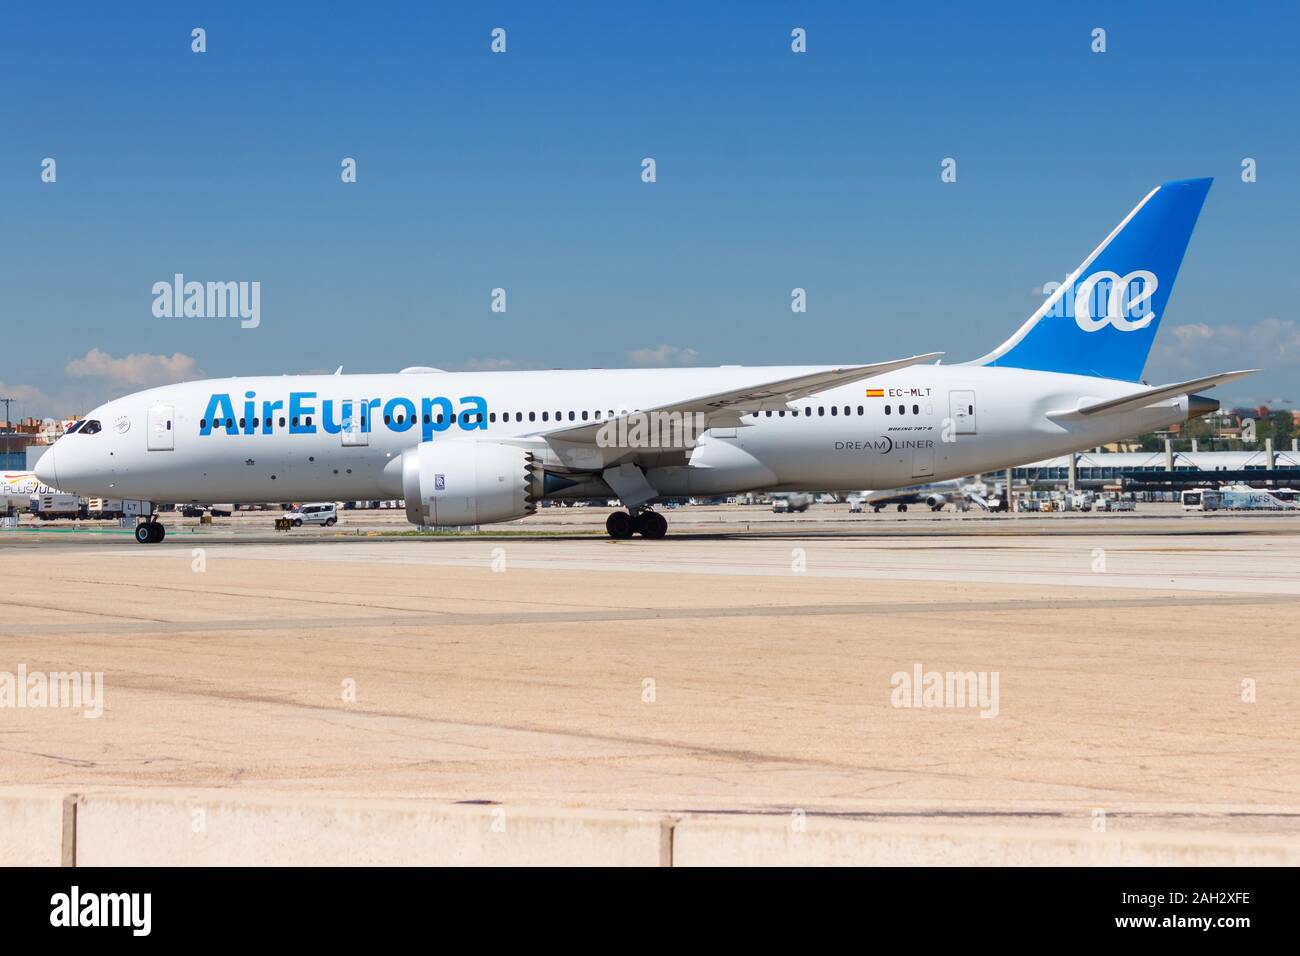 Madrid, Spain - April 10, 2017: Air Europa Boeing 787 airplane at Madrid airport (MAD) in Spain. Boeing is an aircraft manufacturer based in Seattle, Stock Photo